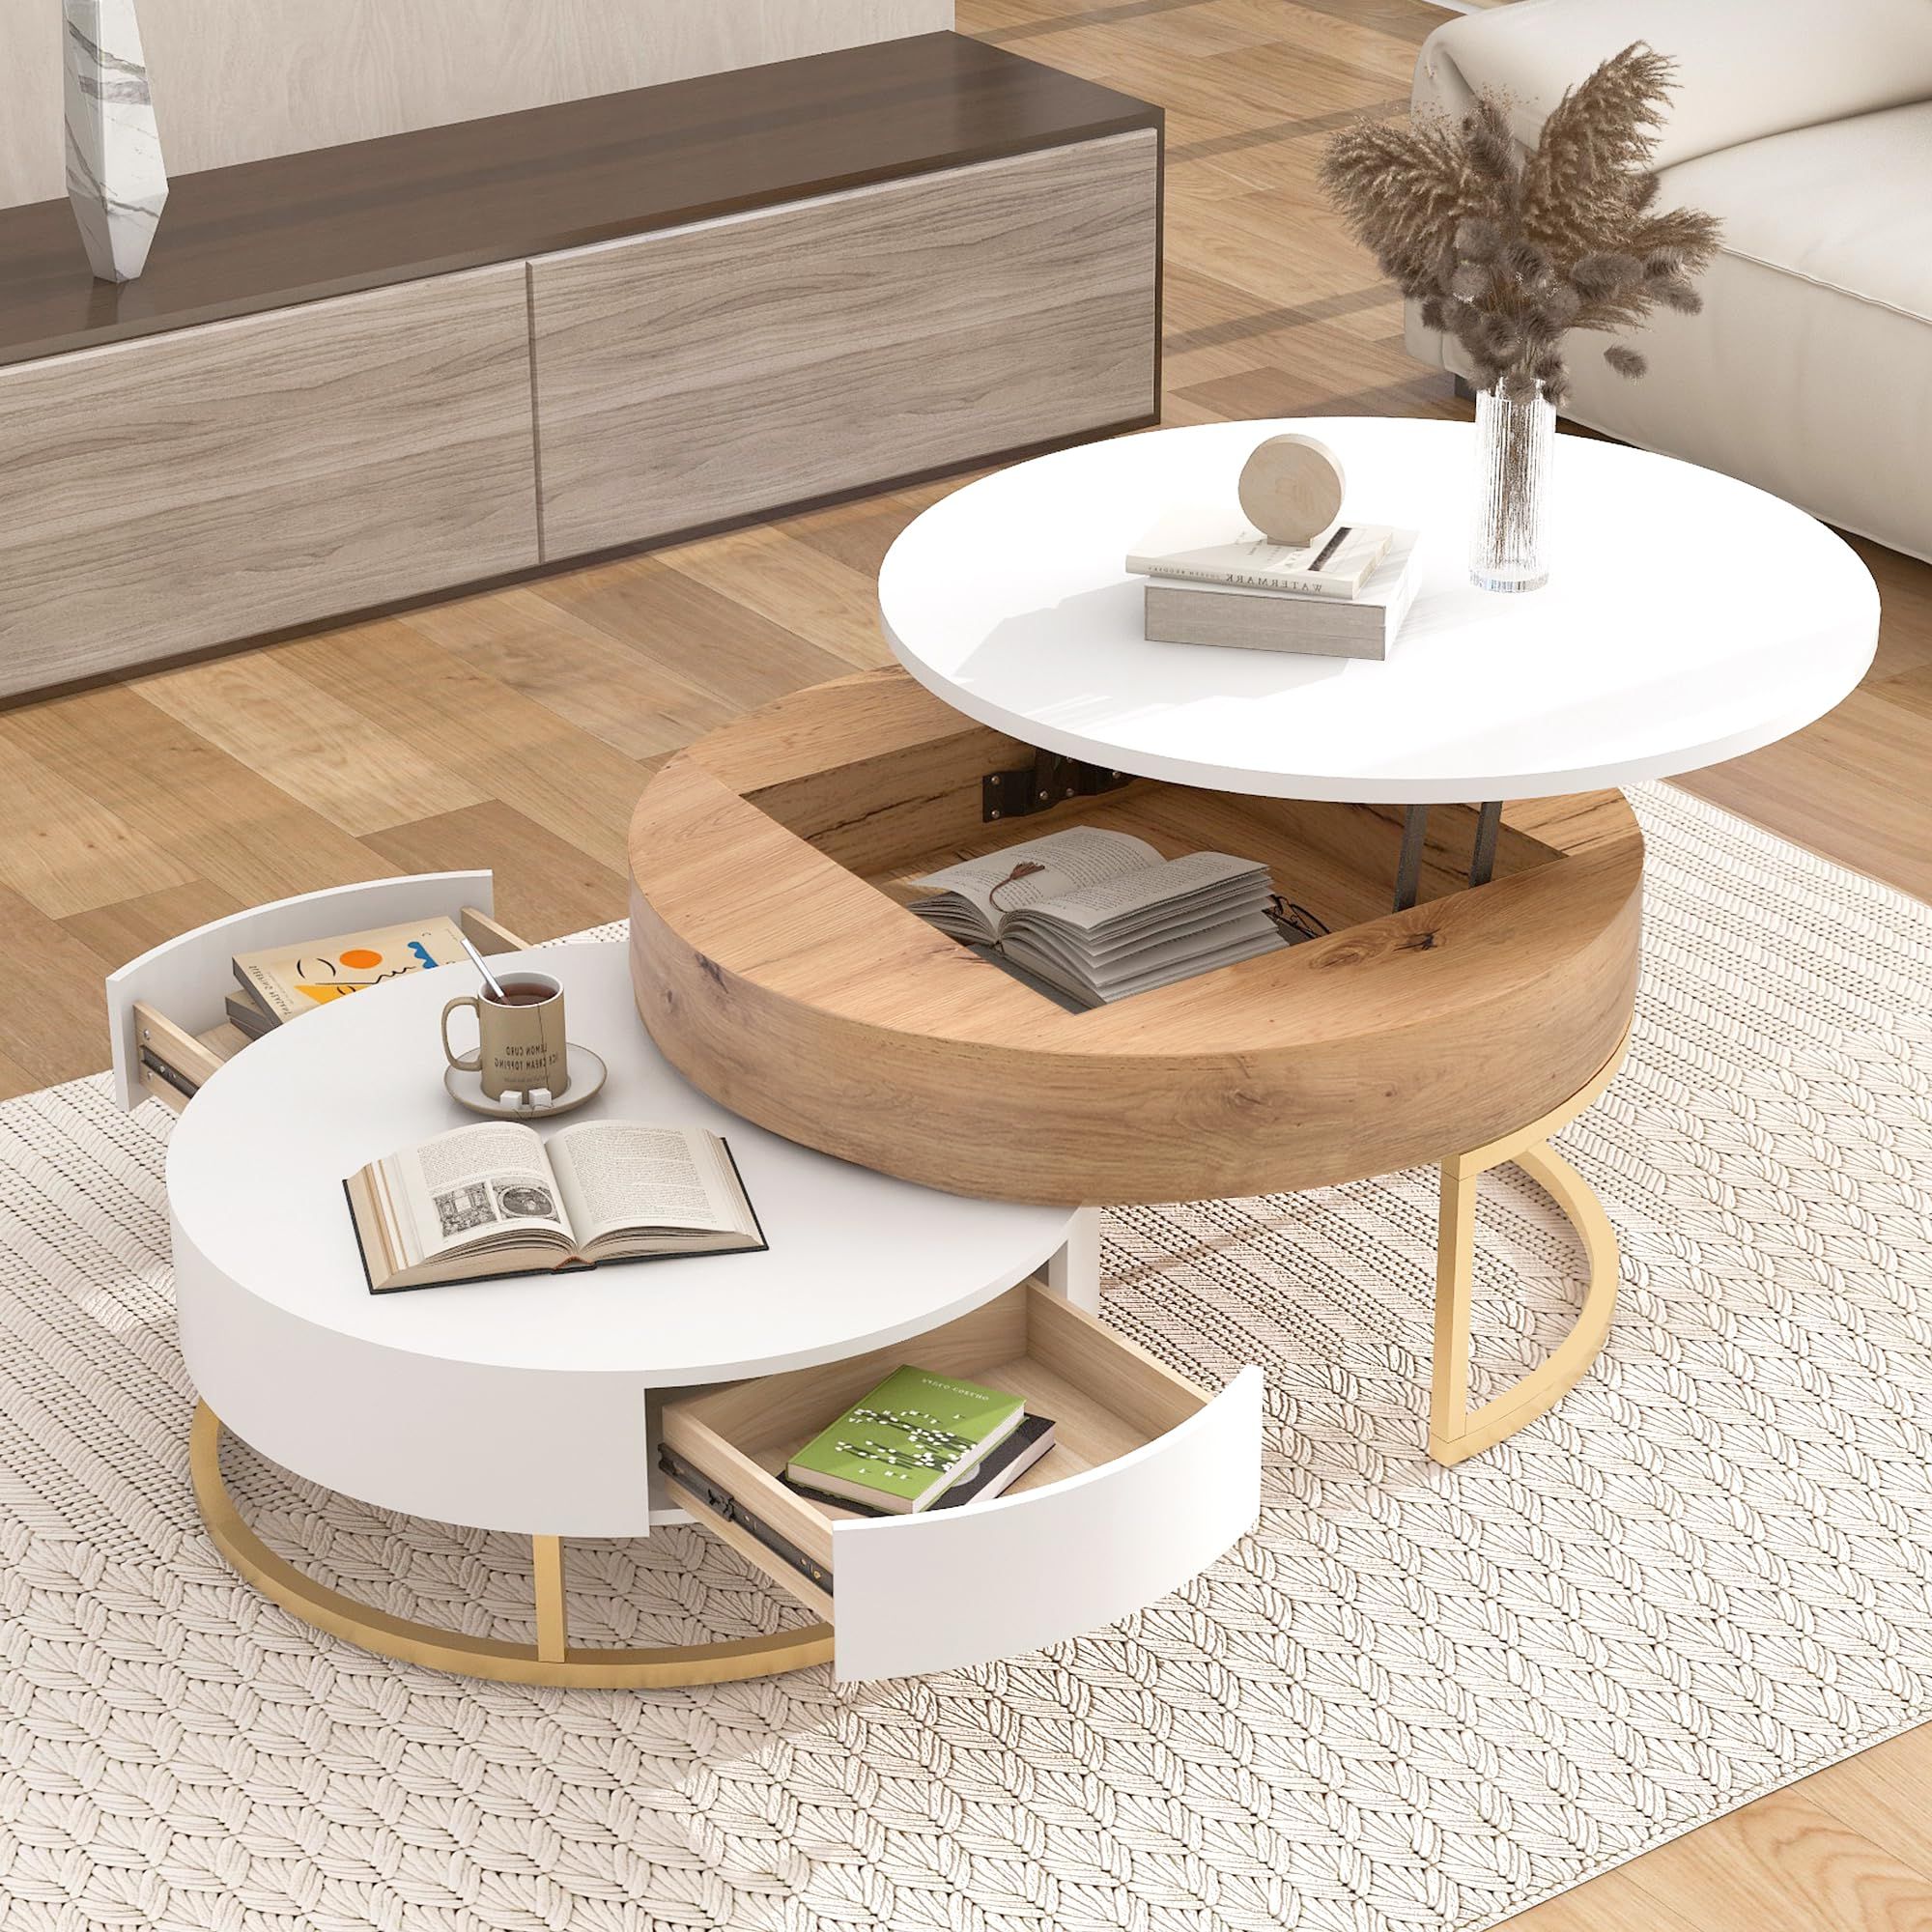 Widely Used Amazon: Lz Leisure Zone Lift Top Coffee Table, Round Nesting Coffee  Table With Storage Drawers, Modern Unique Coffee Tables For Living Room,  Oak Natural Wood + Antique White : Home & Kitchen Throughout Round Coffee Tables With Storage (View 5 of 10)